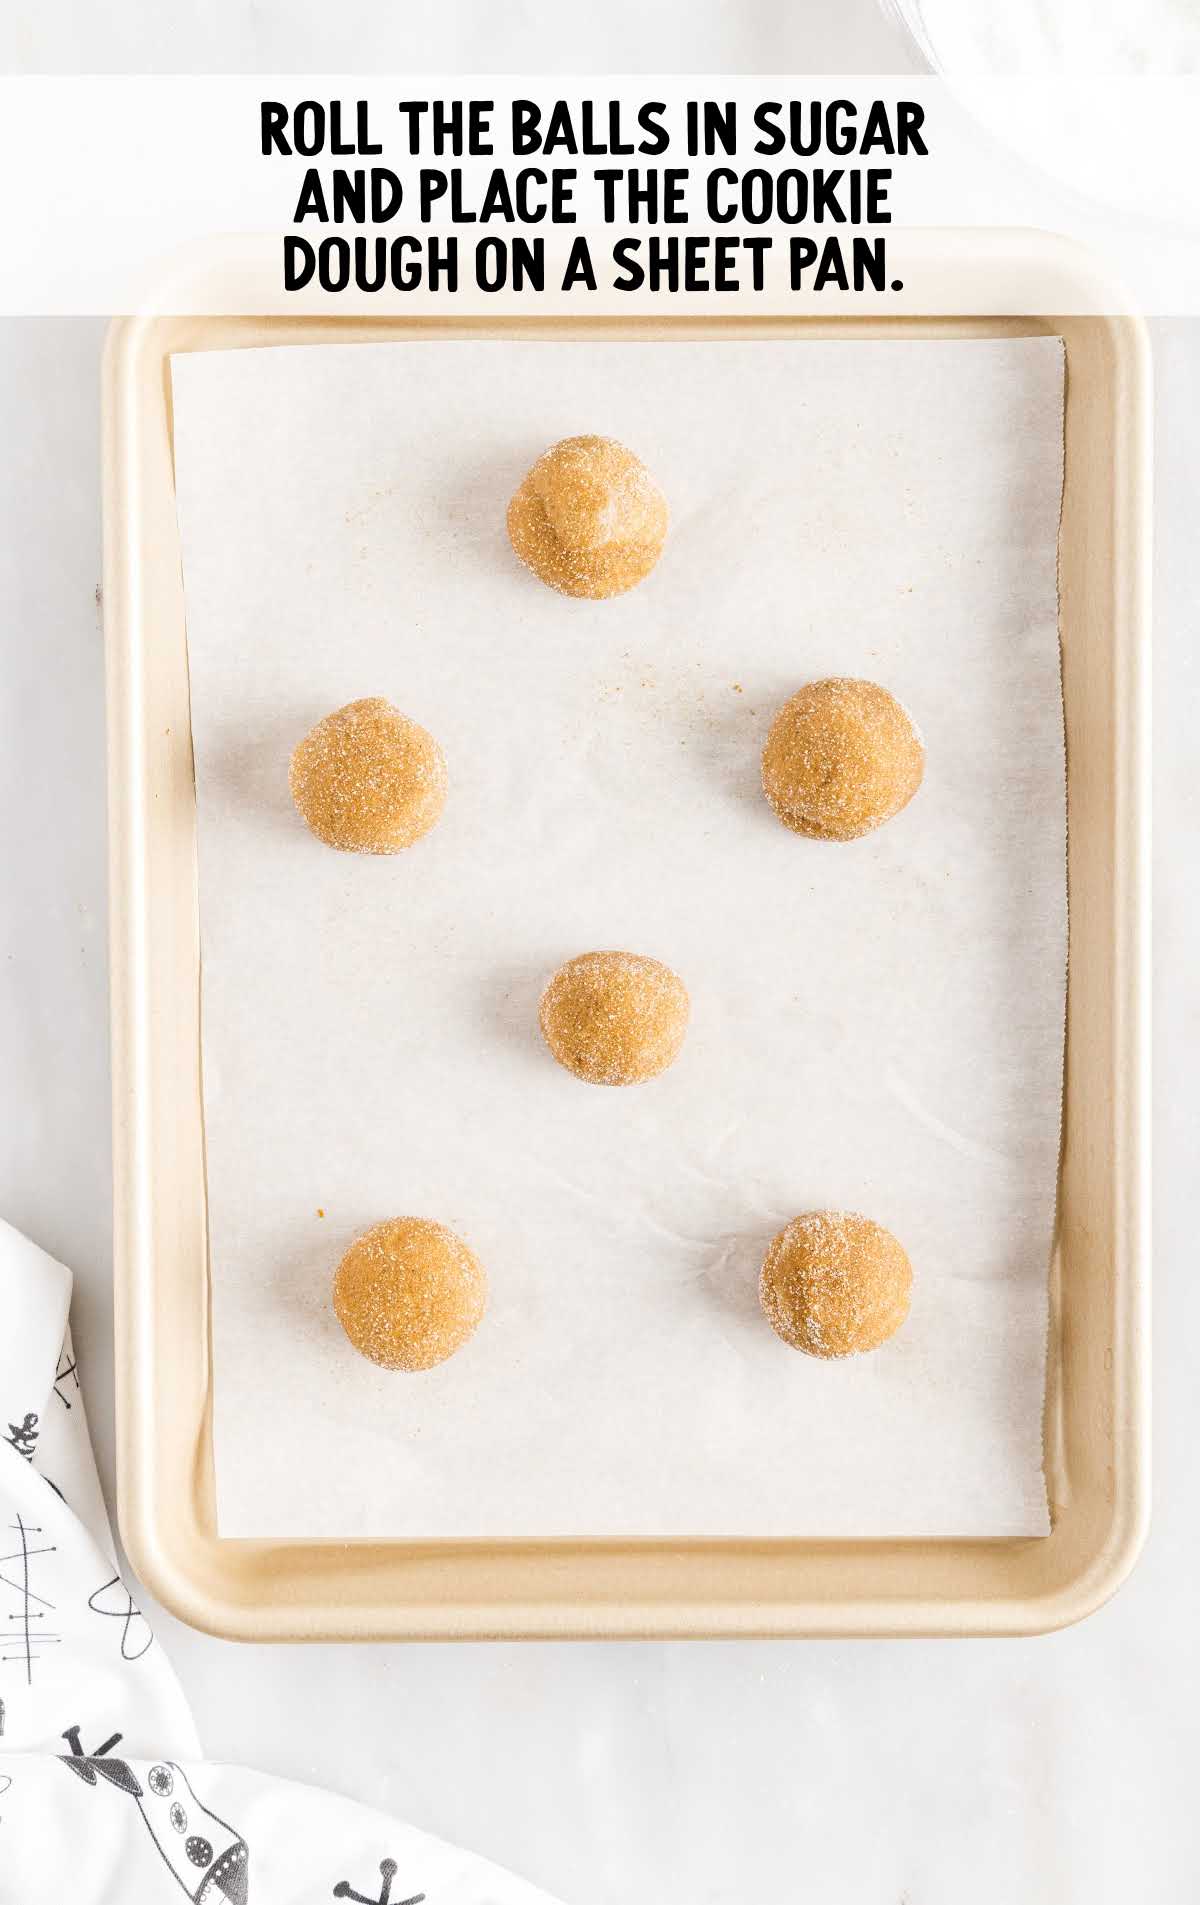 ball rolled in sugar and placed in a sheet pan